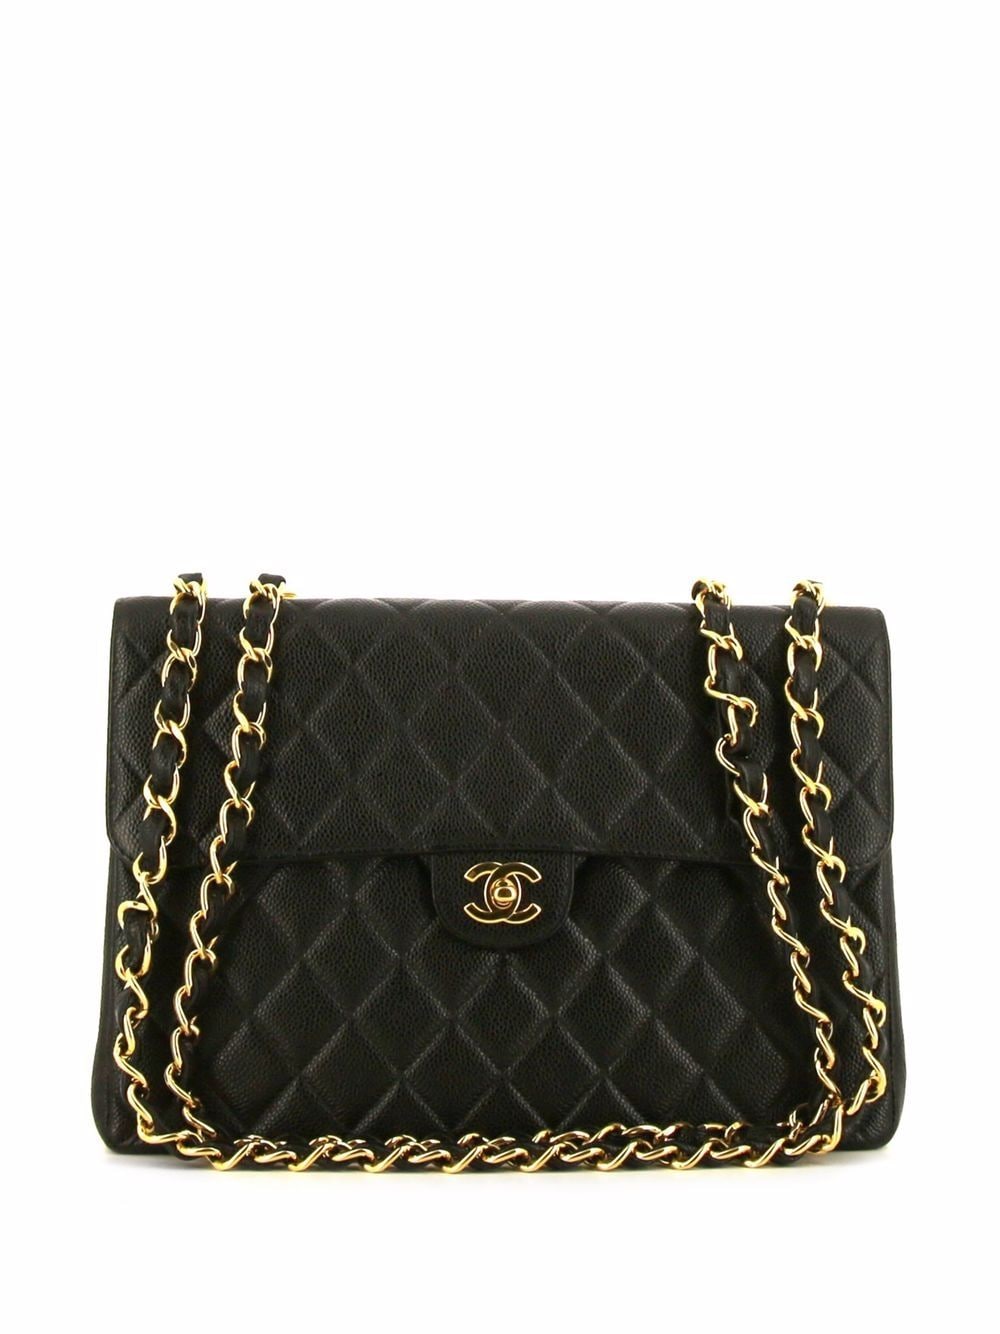 CHANEL Pre-Owned Timeless Jumbo Classic Flap Shoulder Bag